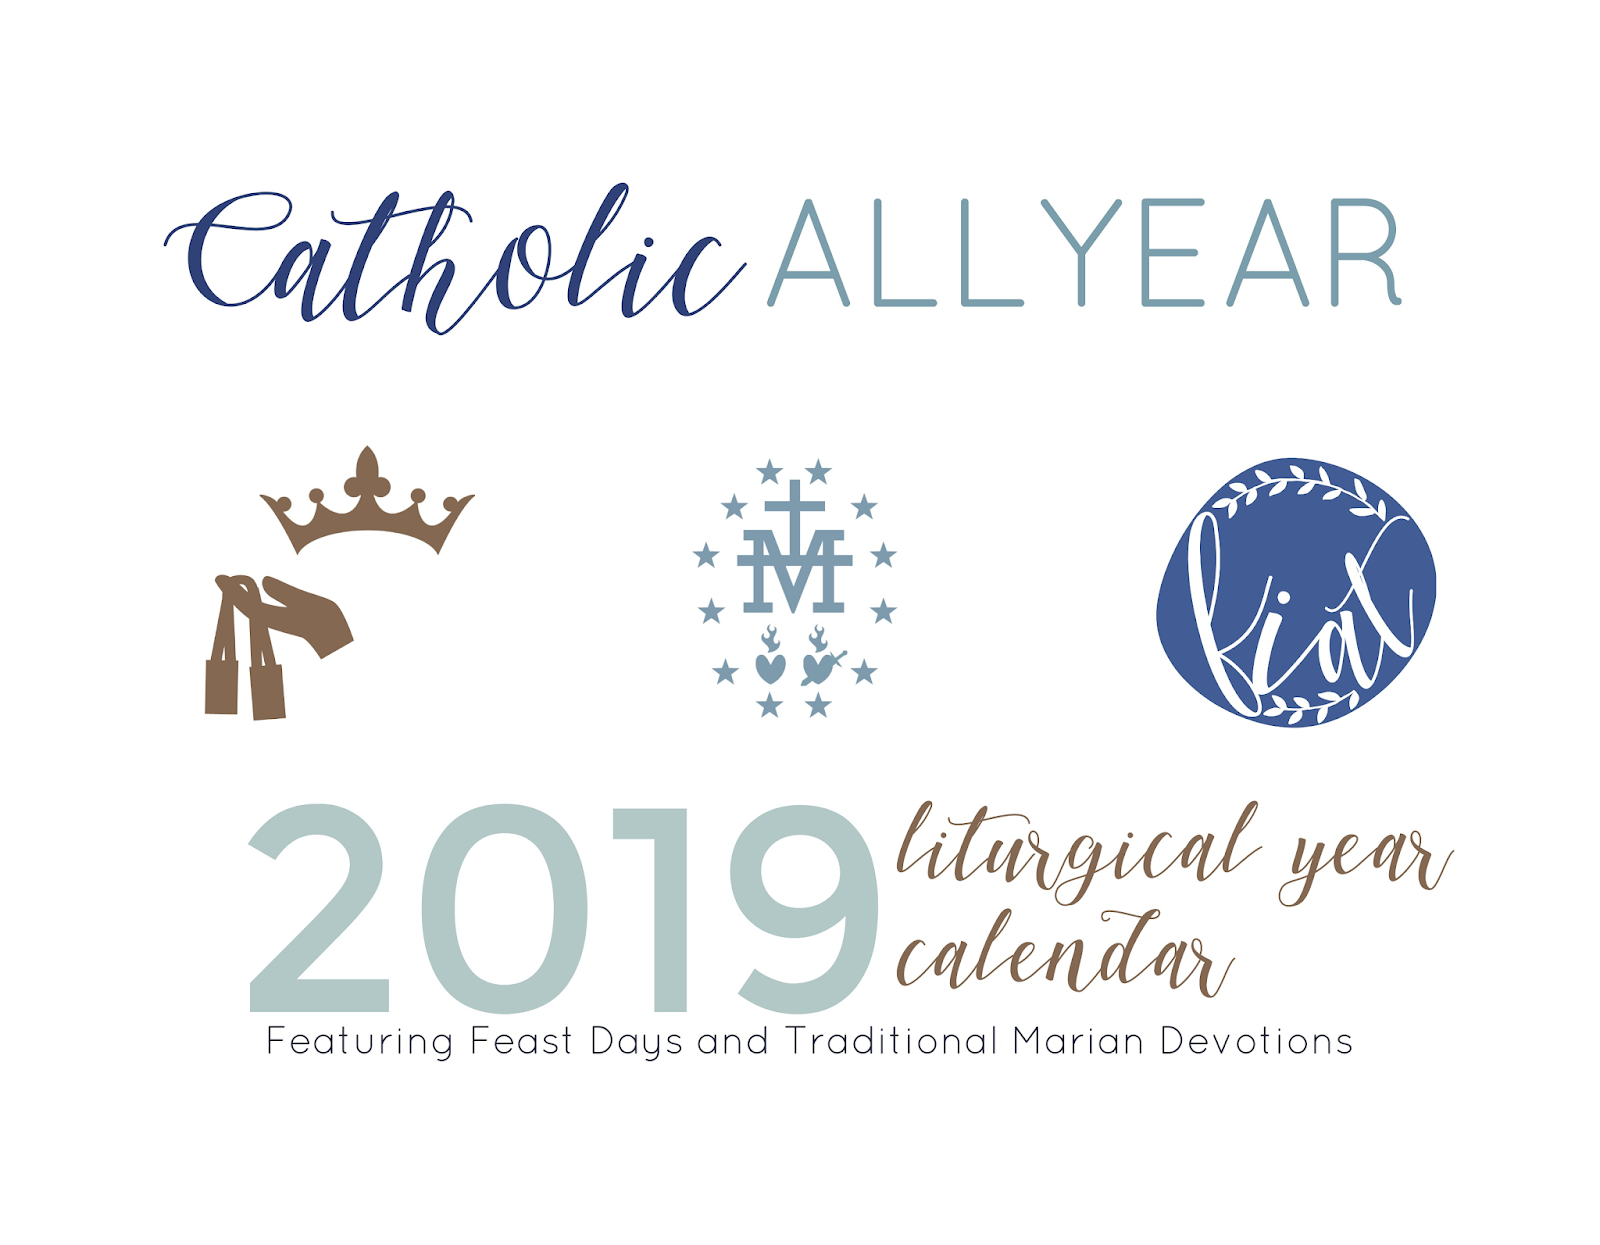 Some Advent Resources to Complement the Compendium Catholic All Year